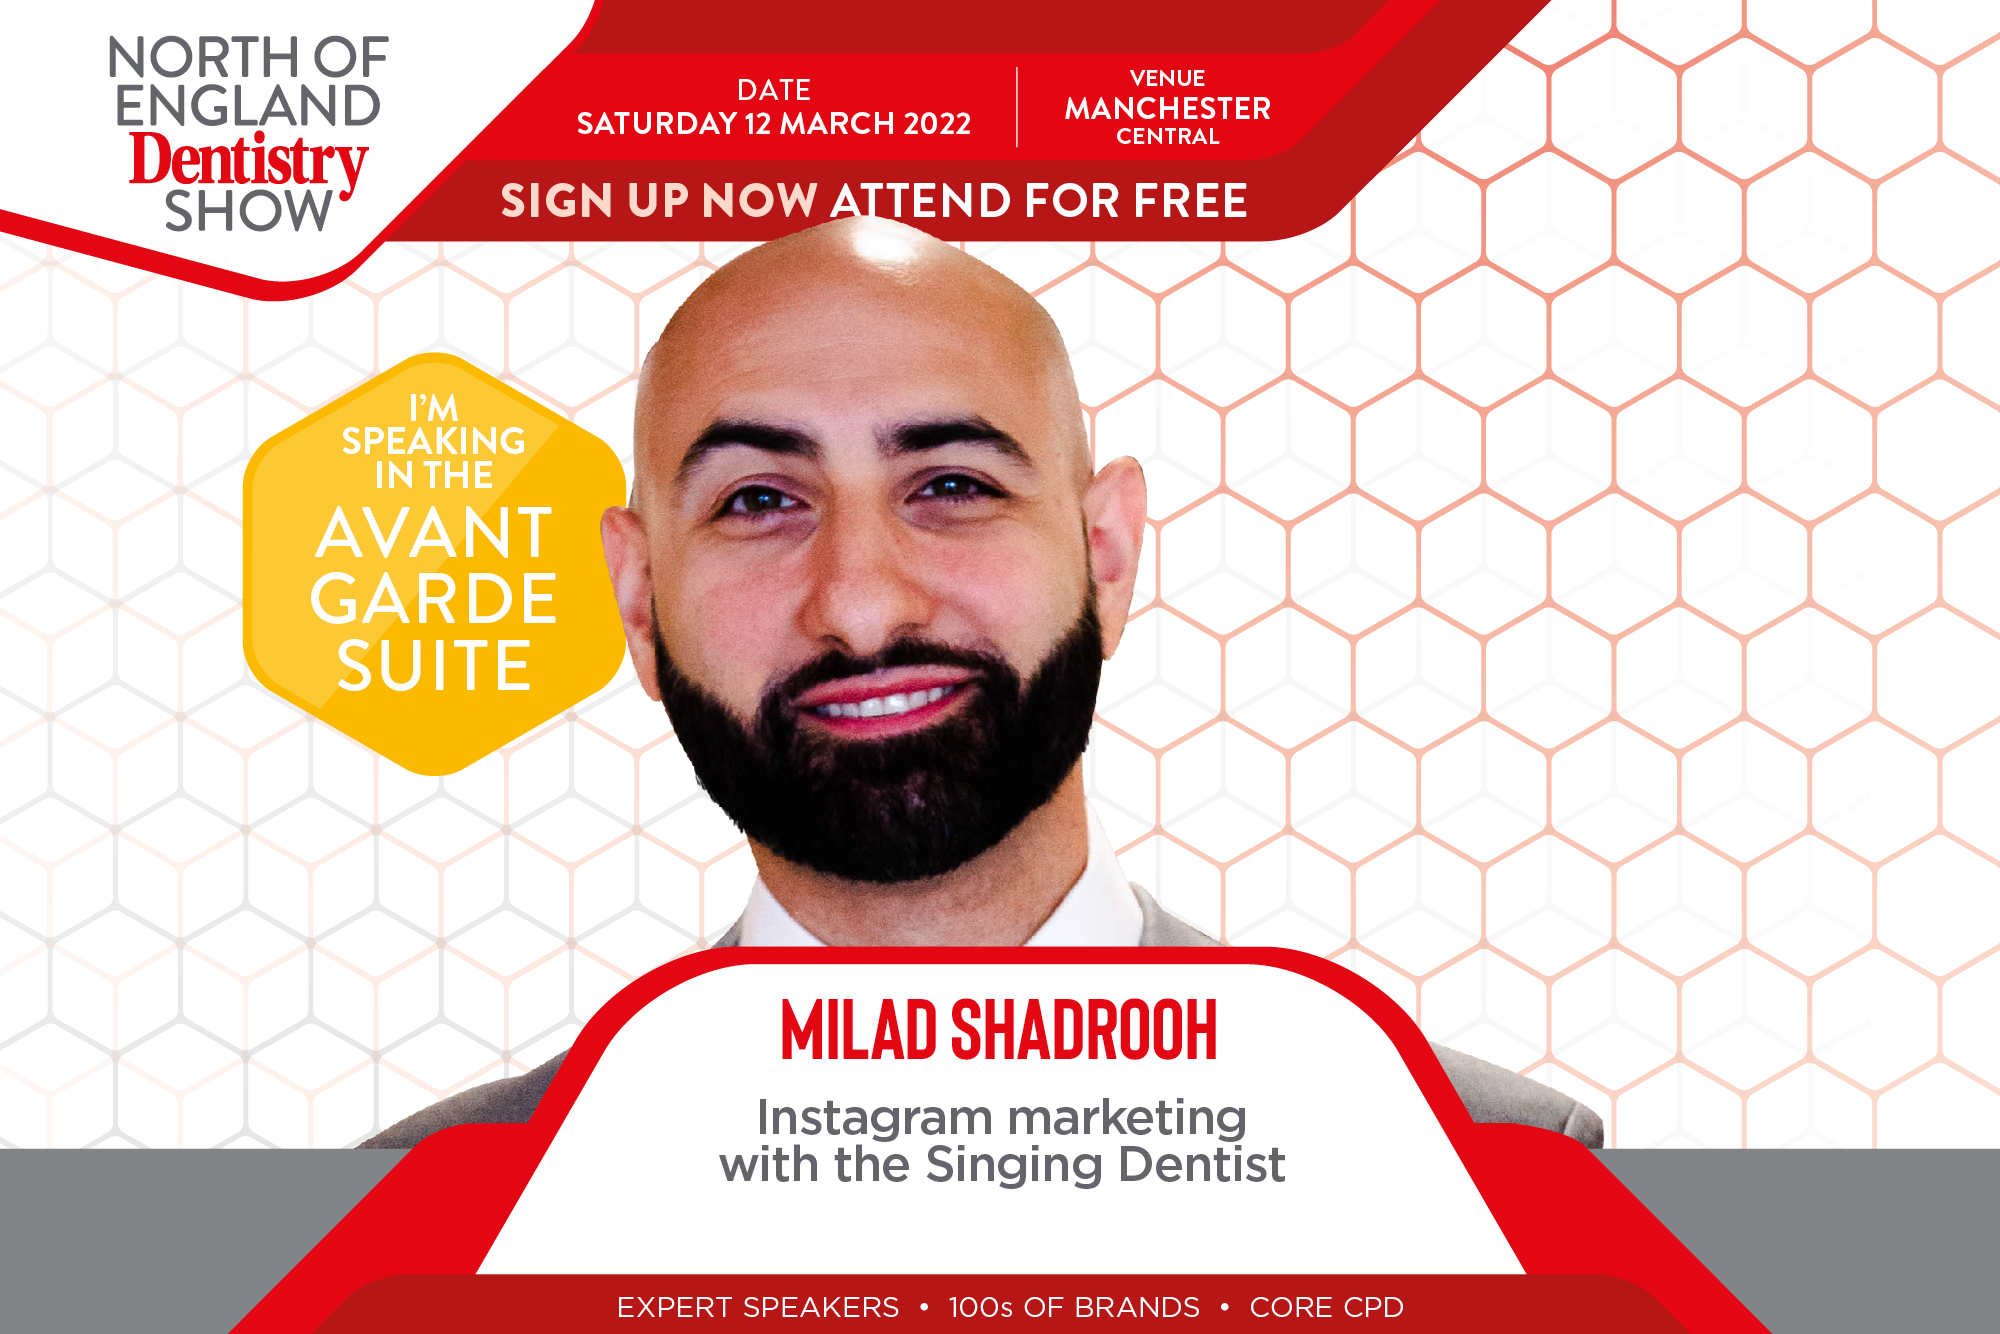 North of England Dentistry Show – Milad Shadrooh